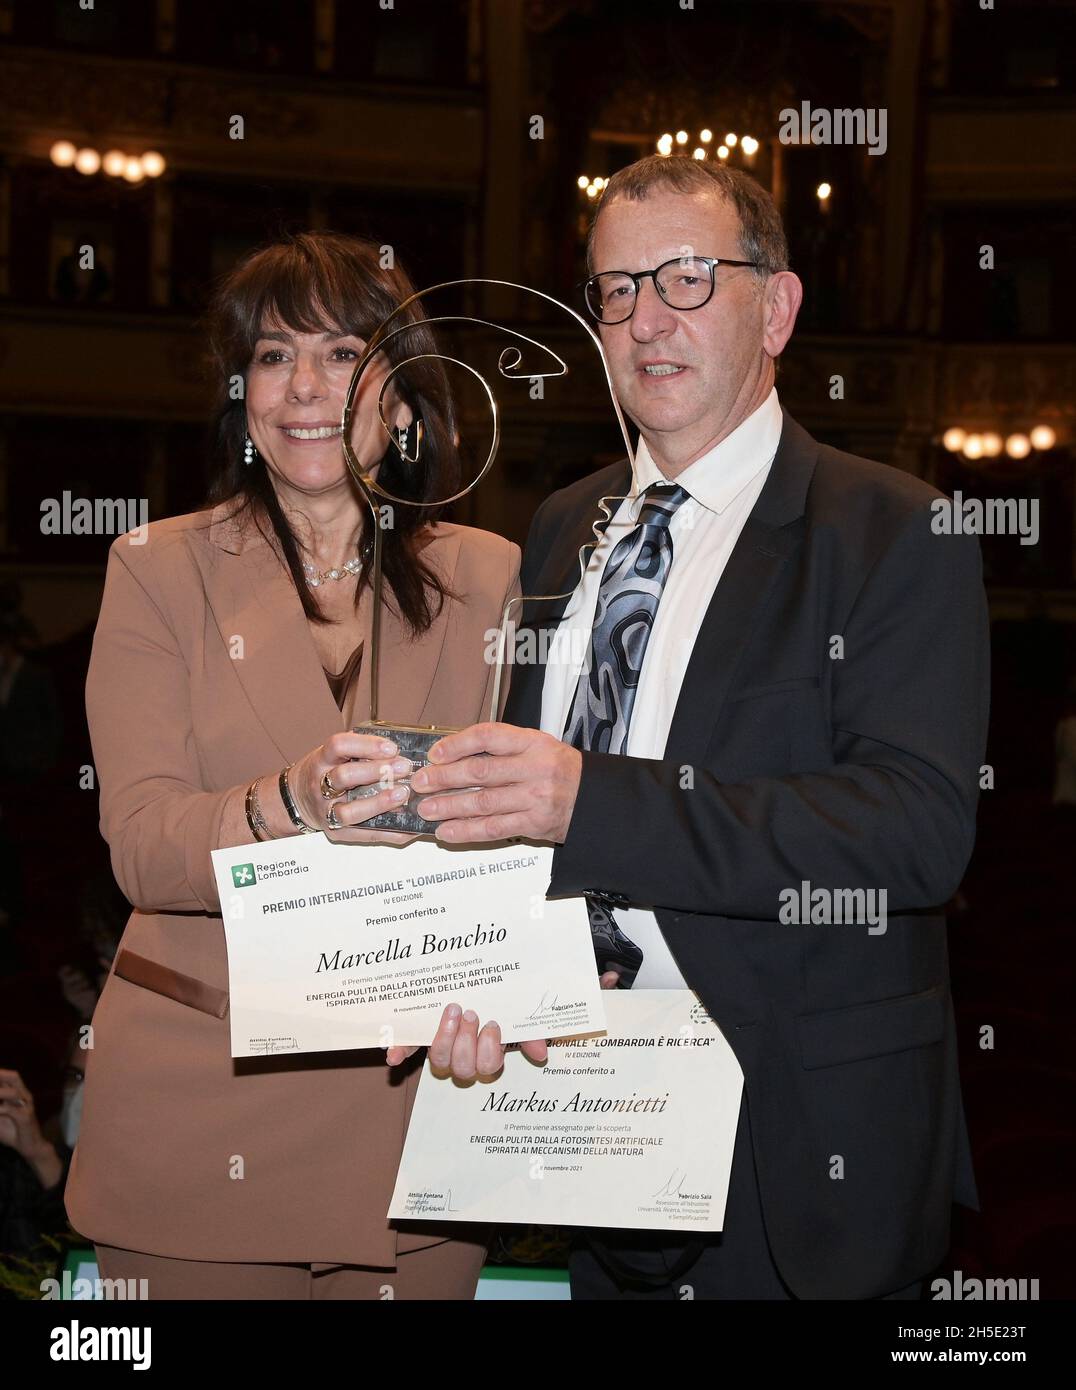 Milan, Italy. 08th Nov, 2021. Milan, Italy La Scala Marcella Bonchio, Markus Antonietti and Pierre Joliot are awarded the 2020-2021 edition of the International Award 'Lombardia è Ricerca', the recognition promoted by the Lombardy Region which assigns 1 million euros to the best scientific discovery in the field of 'Sciences of Life' attended by various institutions and famous guests In the picture: Credit: Independent Photo Agency/Alamy Live News Stock Photo